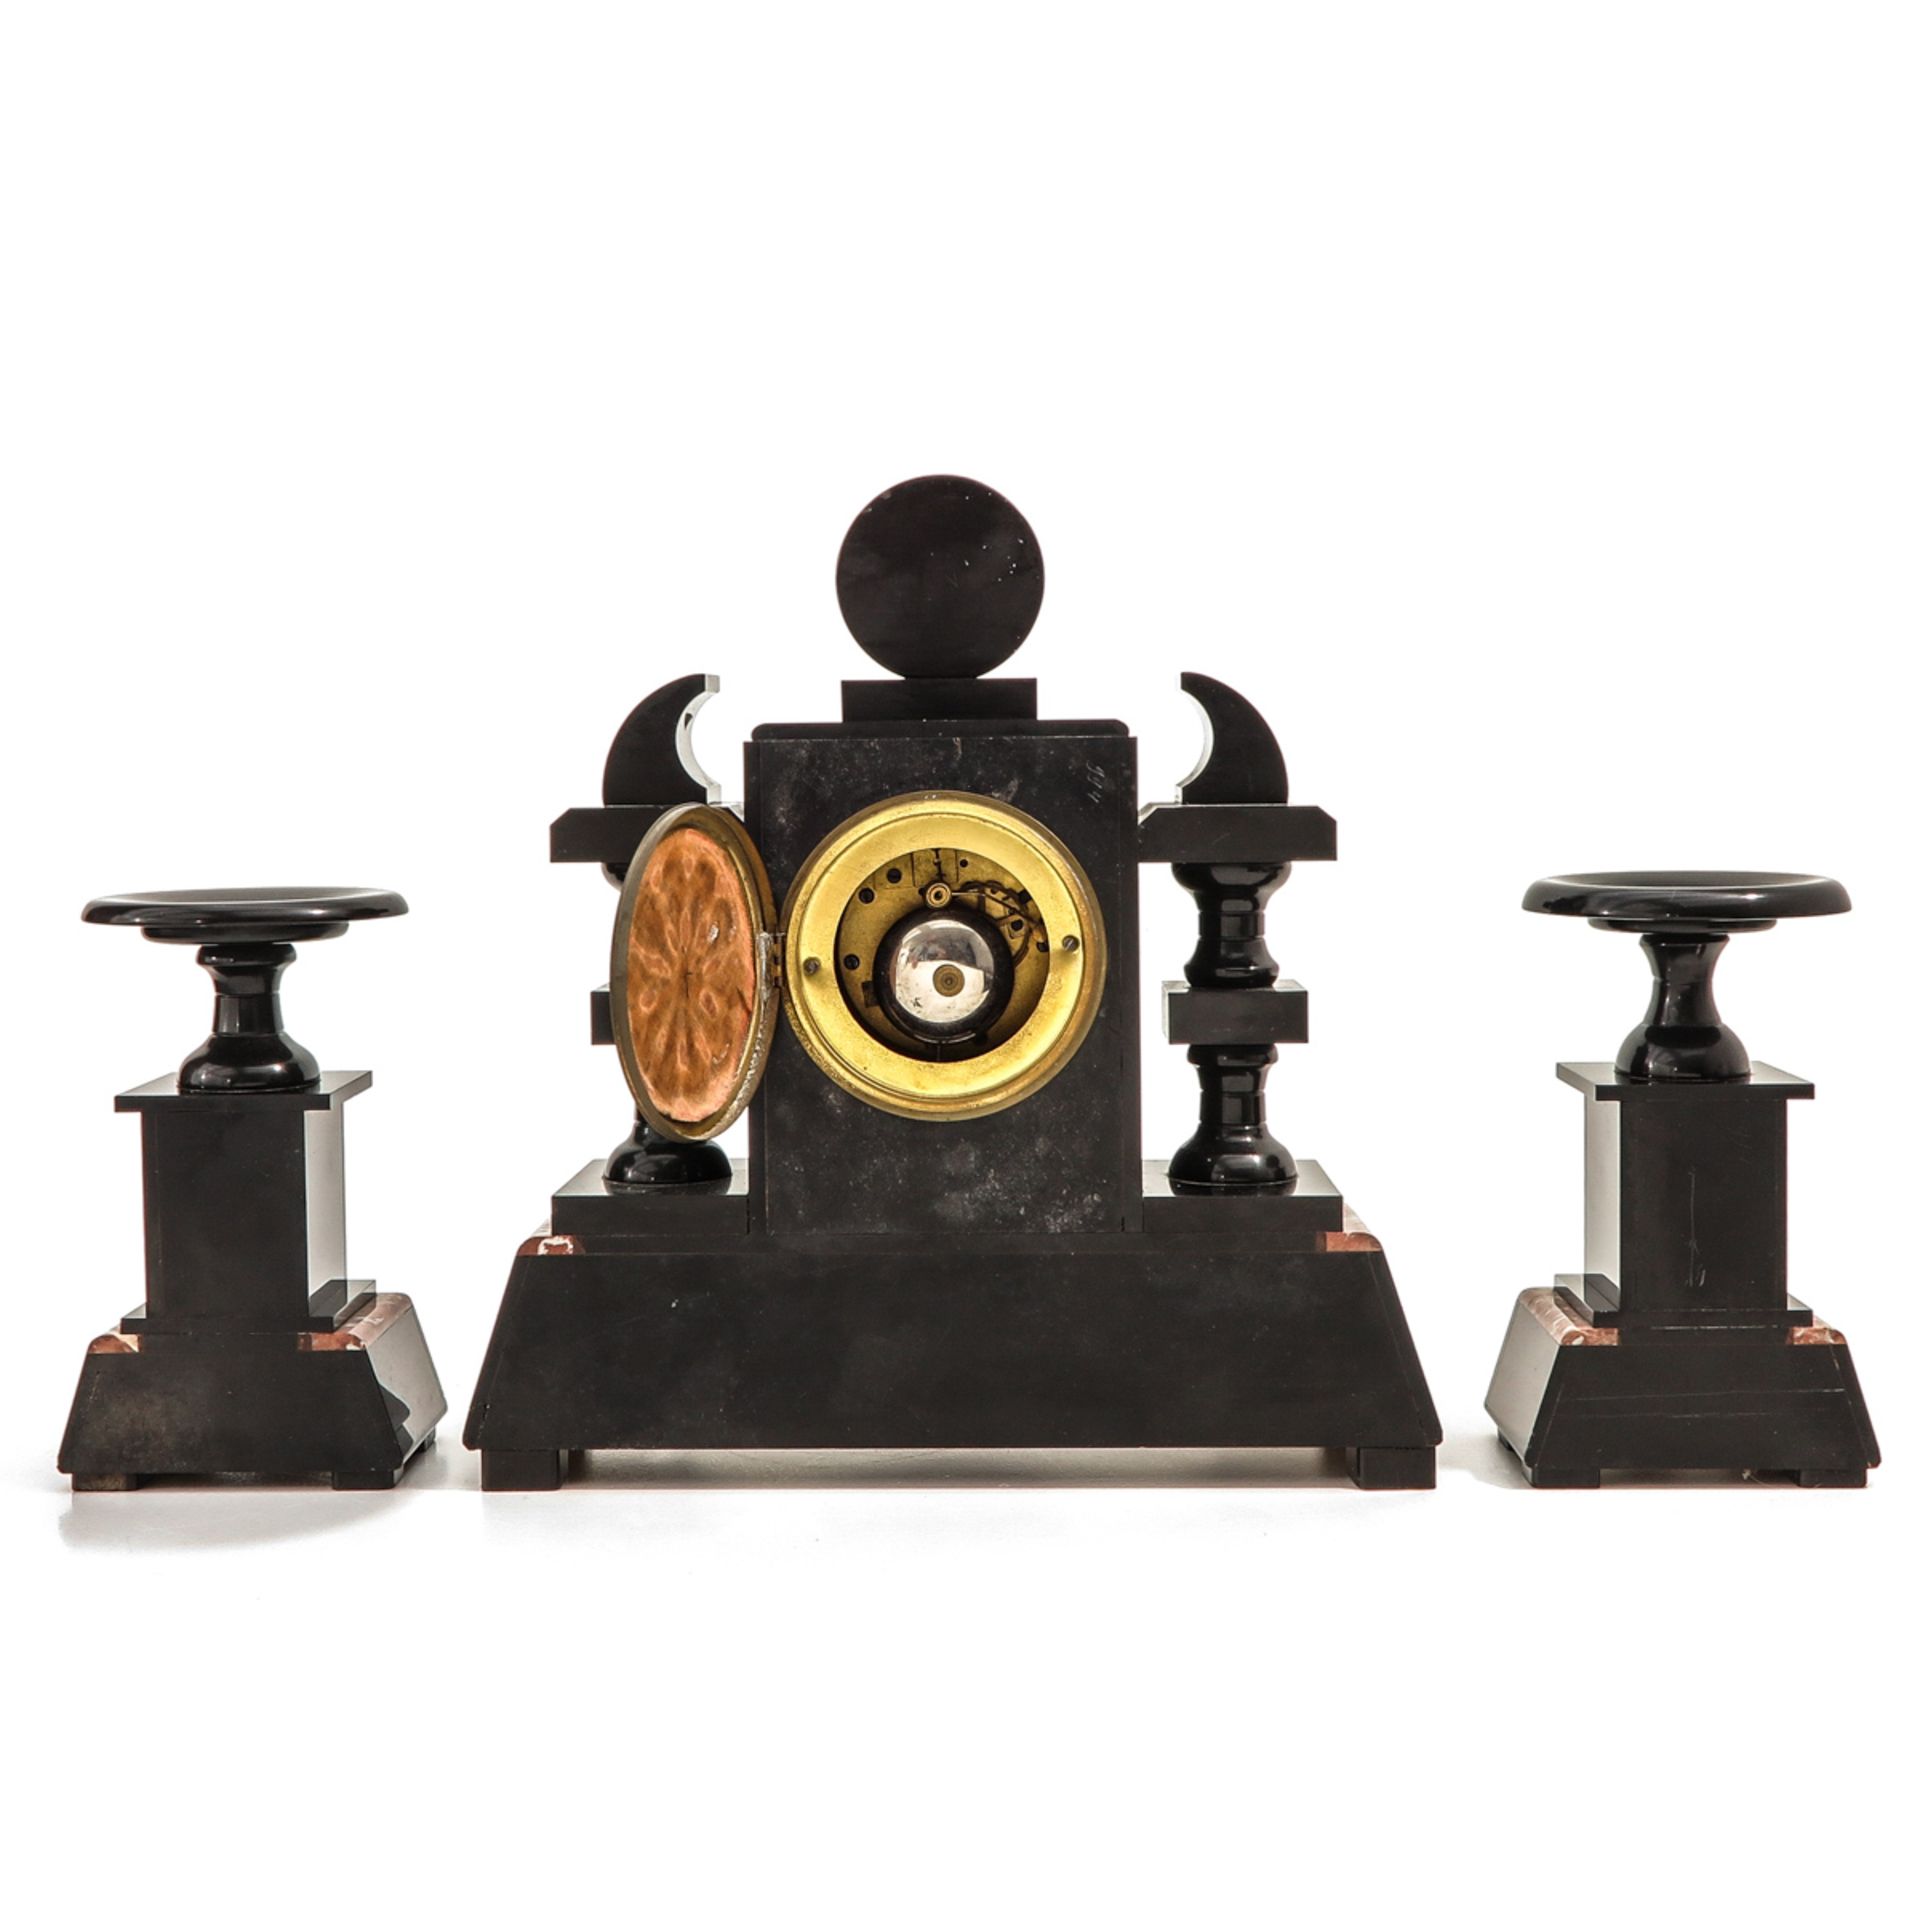 A 3 Piece Marble Clock Set - Image 3 of 10